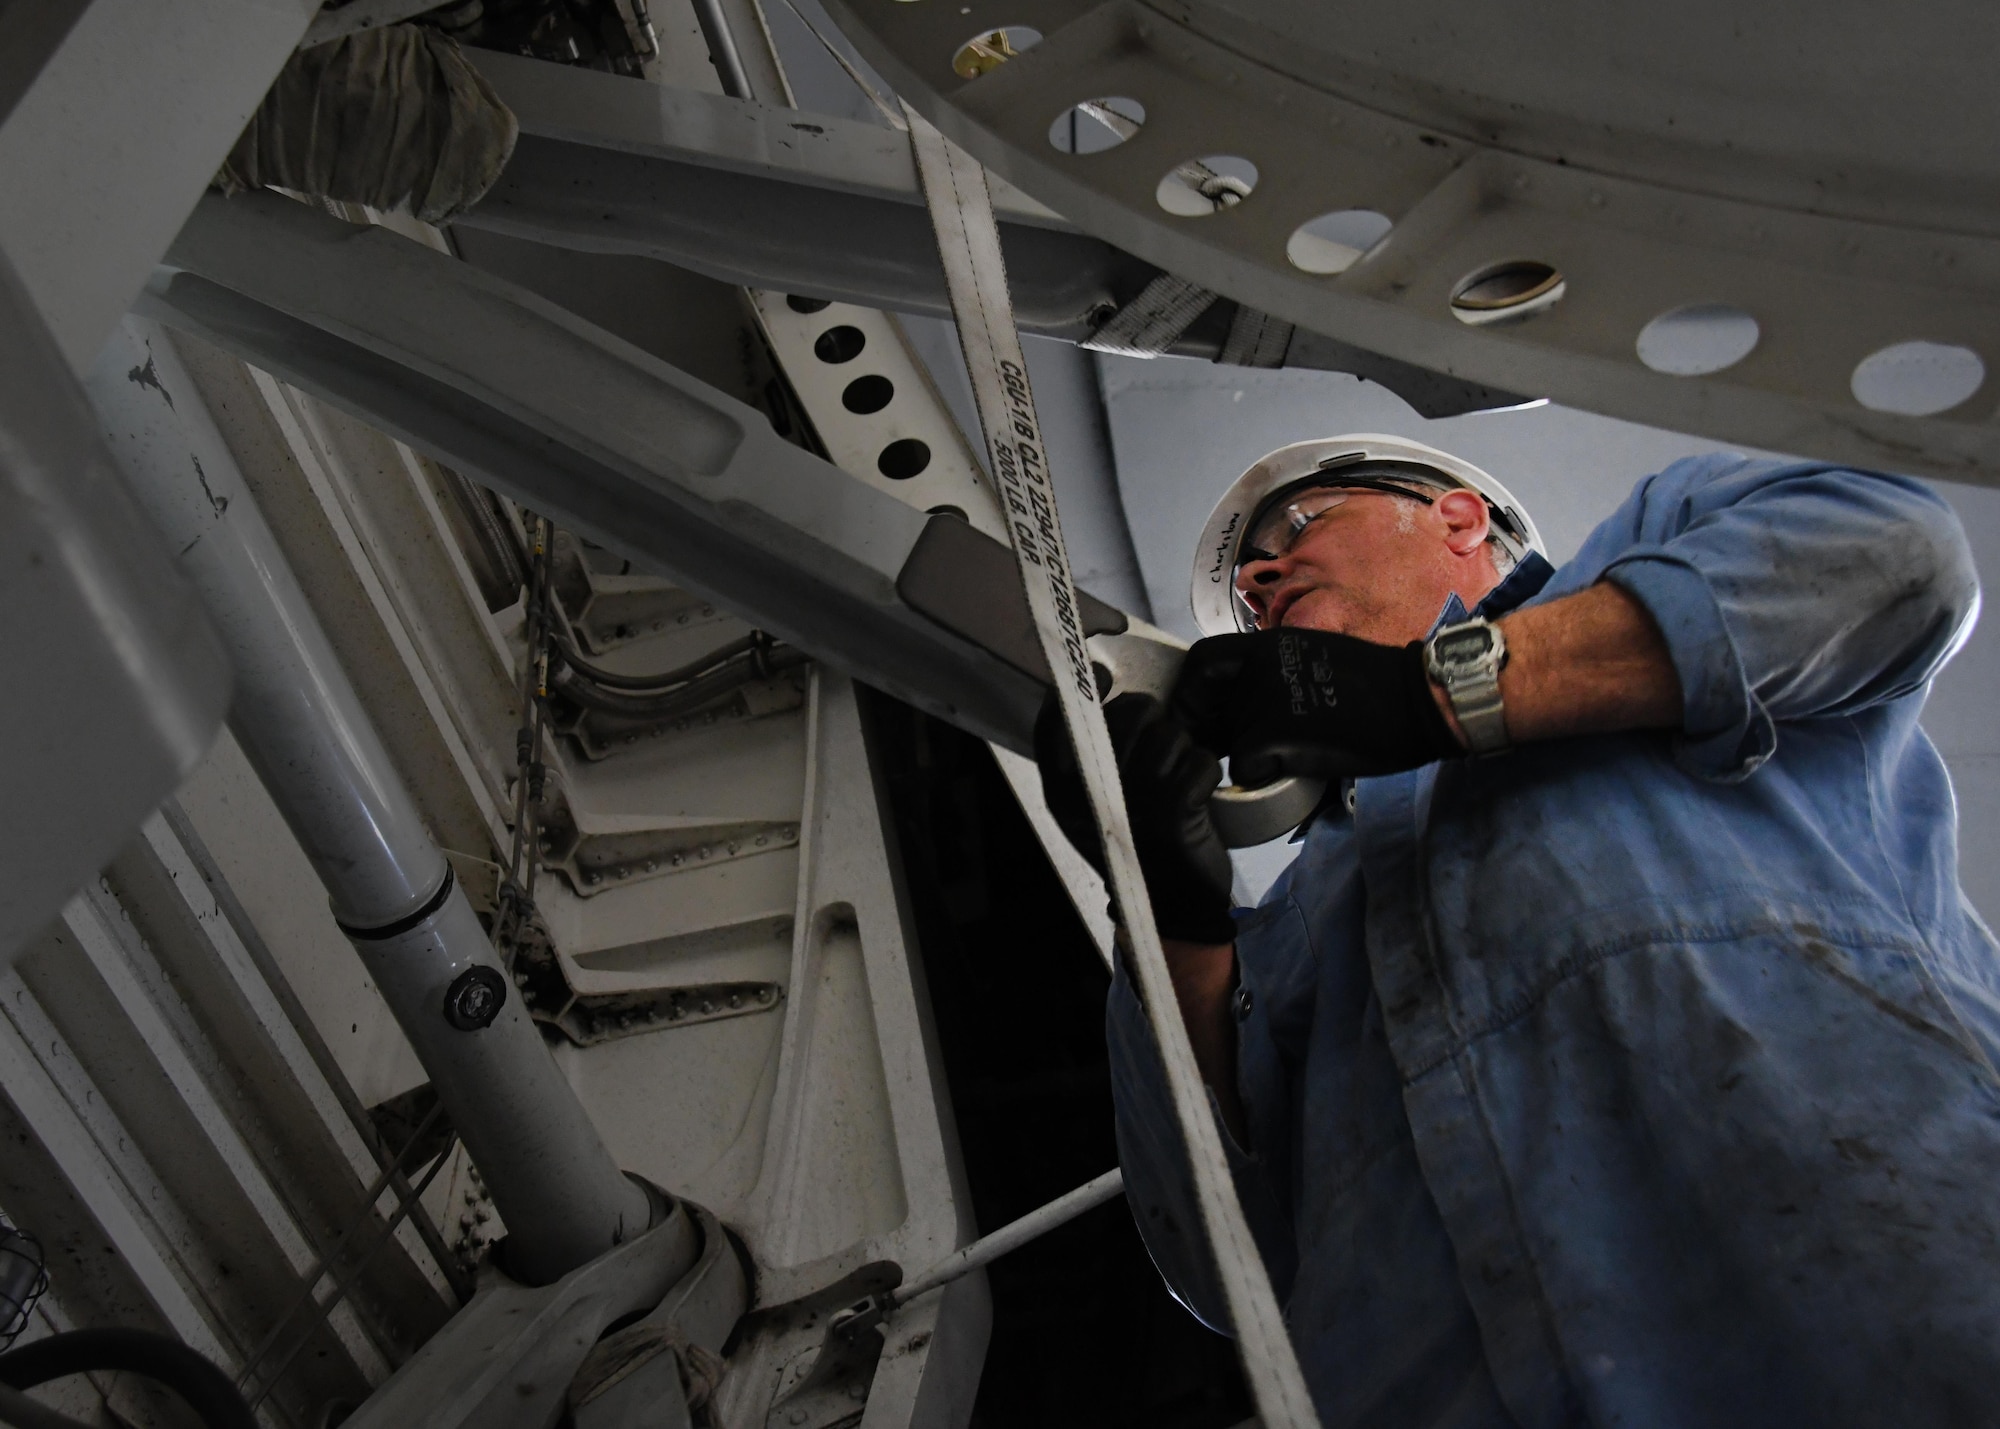 Bruce Natale, a contractor mechanic with Boeing, works on separating the upper cross shaft on a U.S. Air Force C-17 Globemaster III at Al Udeid Air Base, Qatar, Feb. 25, 2017. The C-17 aircraft was lifted up inside a Qatari hangar in order to allow maintenance on it without interruption from the weather. (U.S. Air Force photo by Senior Airman Miles Wilson)